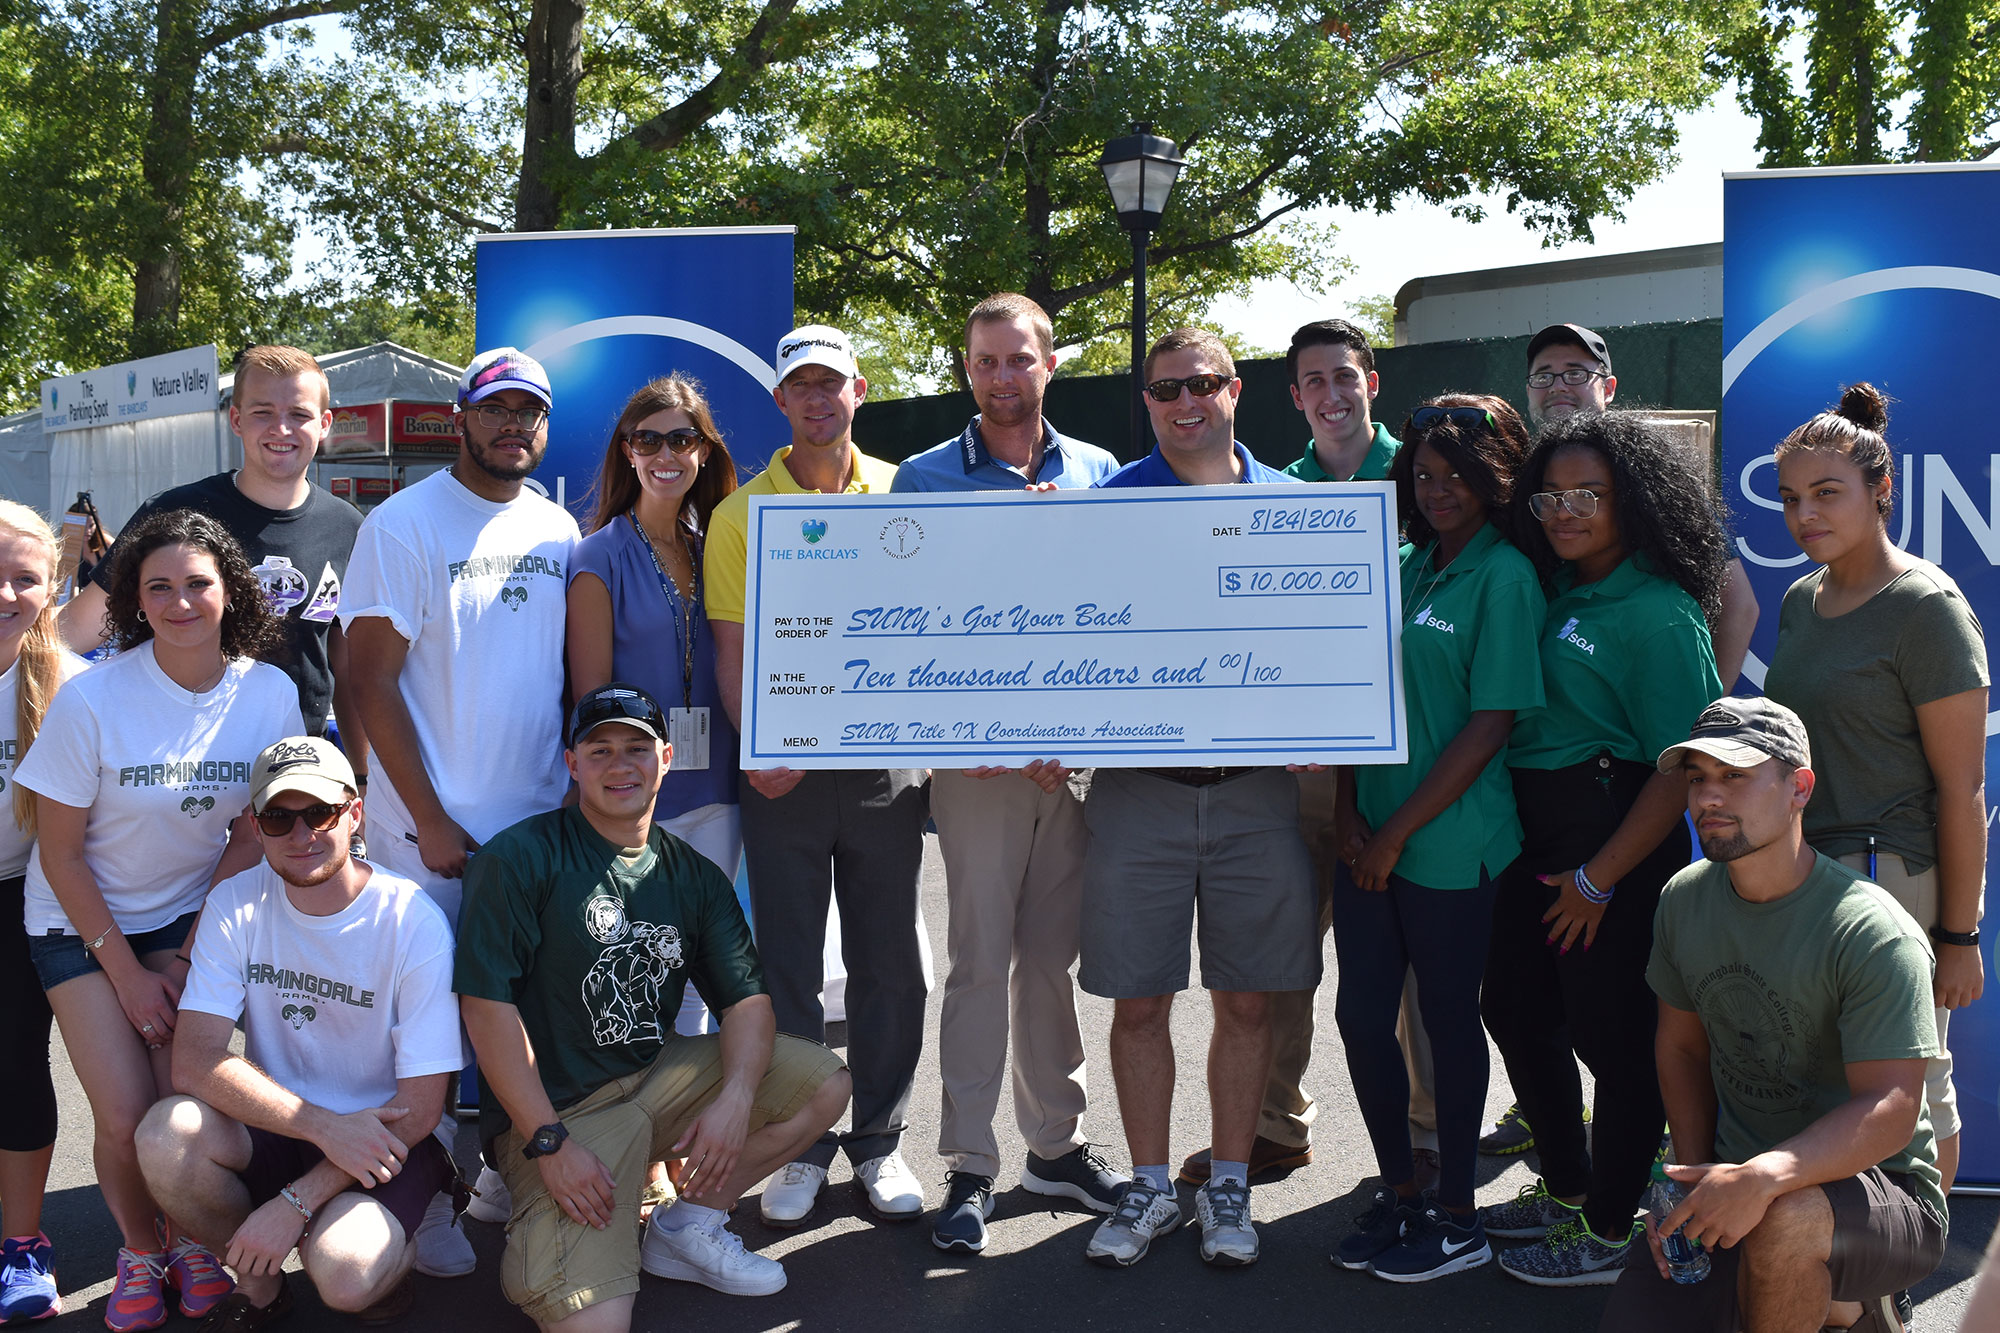 A large check is presnted to the SUNY 's Got Your Back volunteers at The Barclays.